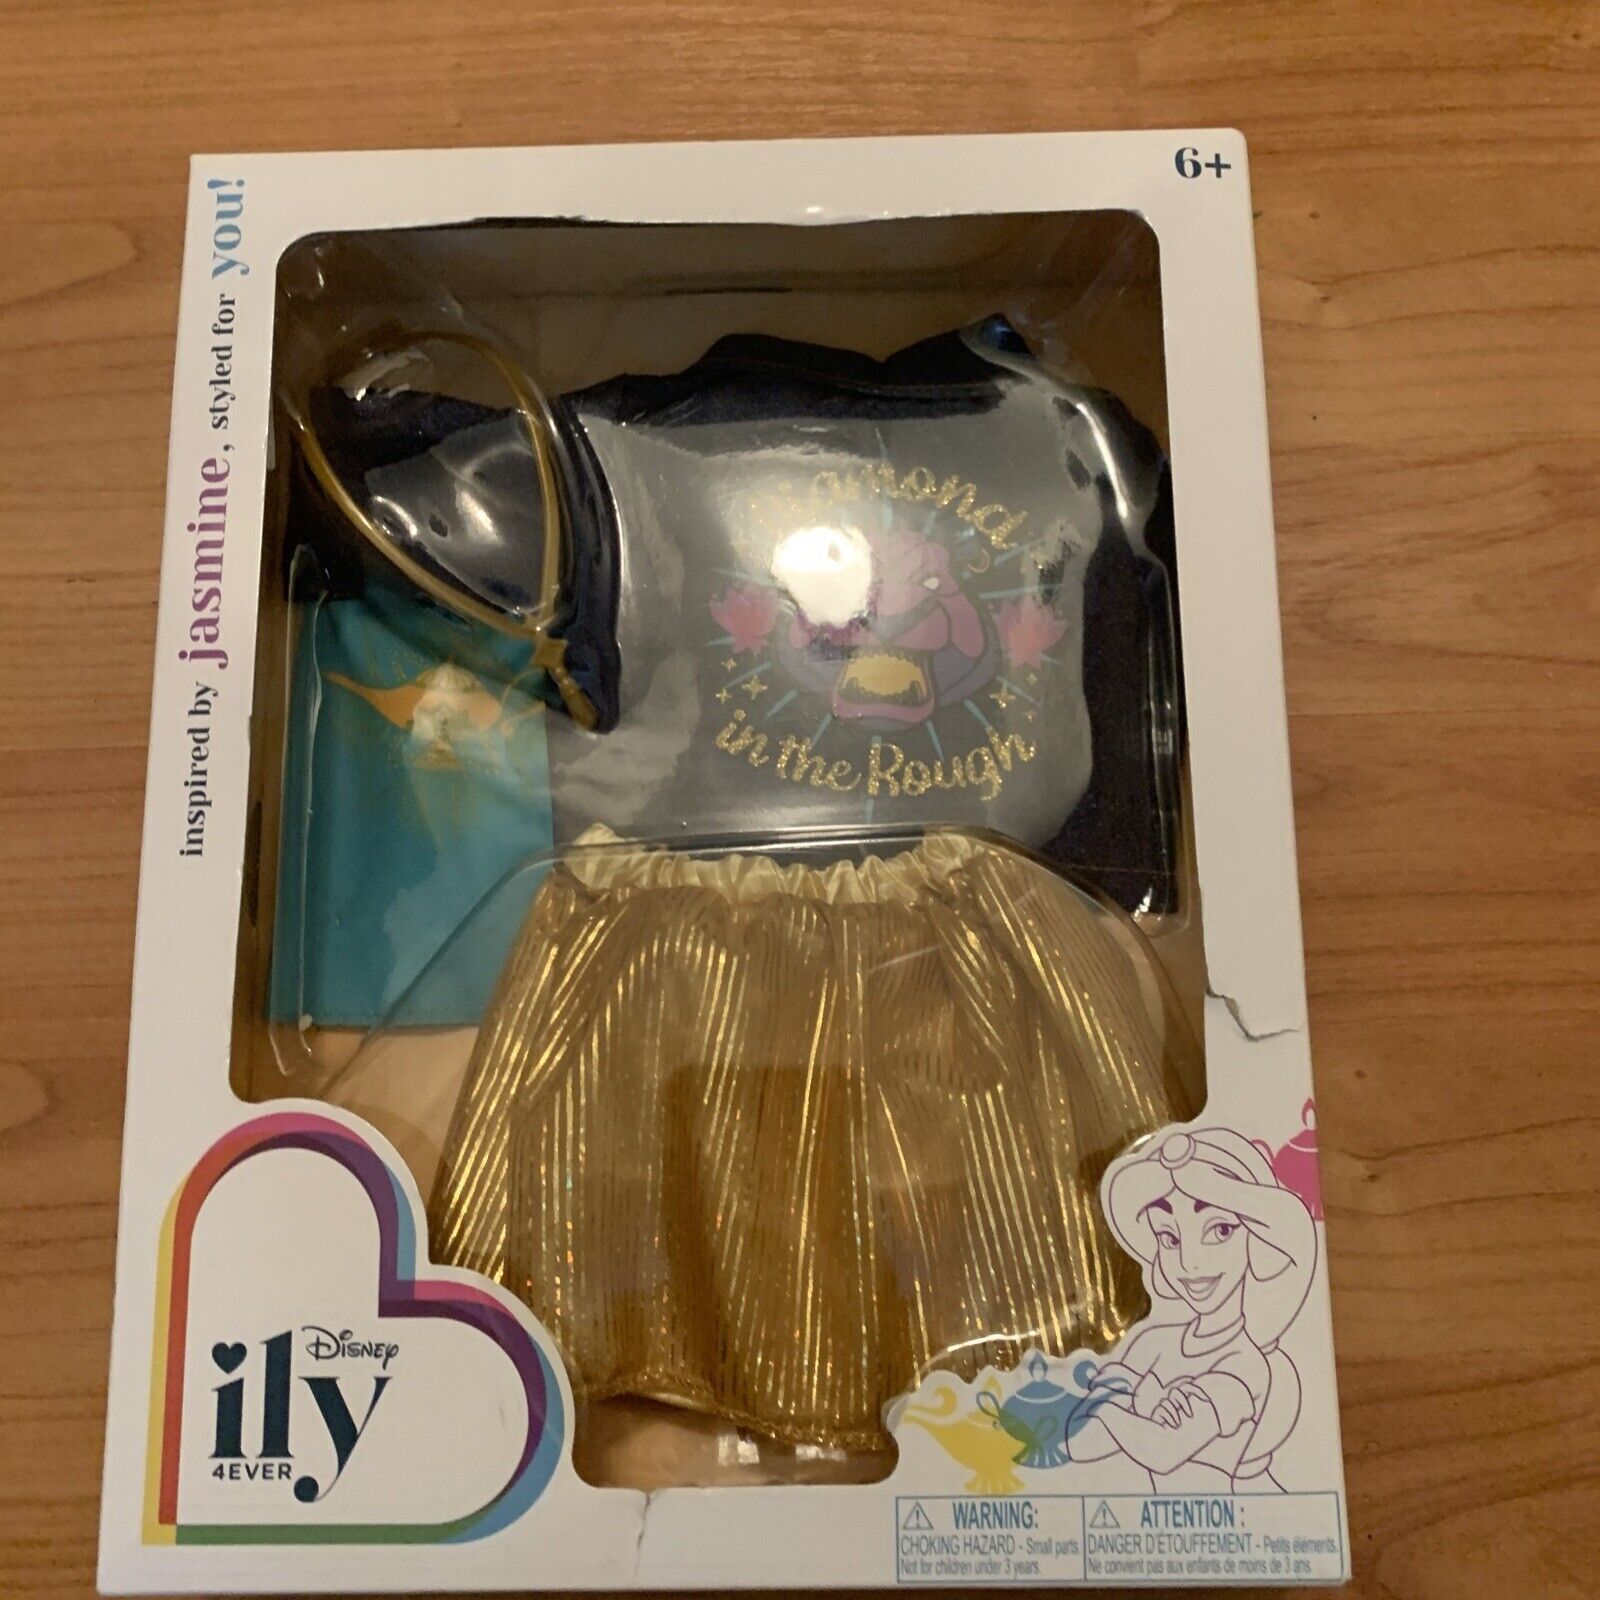 Primary image for Disney Princess for 18" Doll ILY 4 Ever Outfit by Jasmine